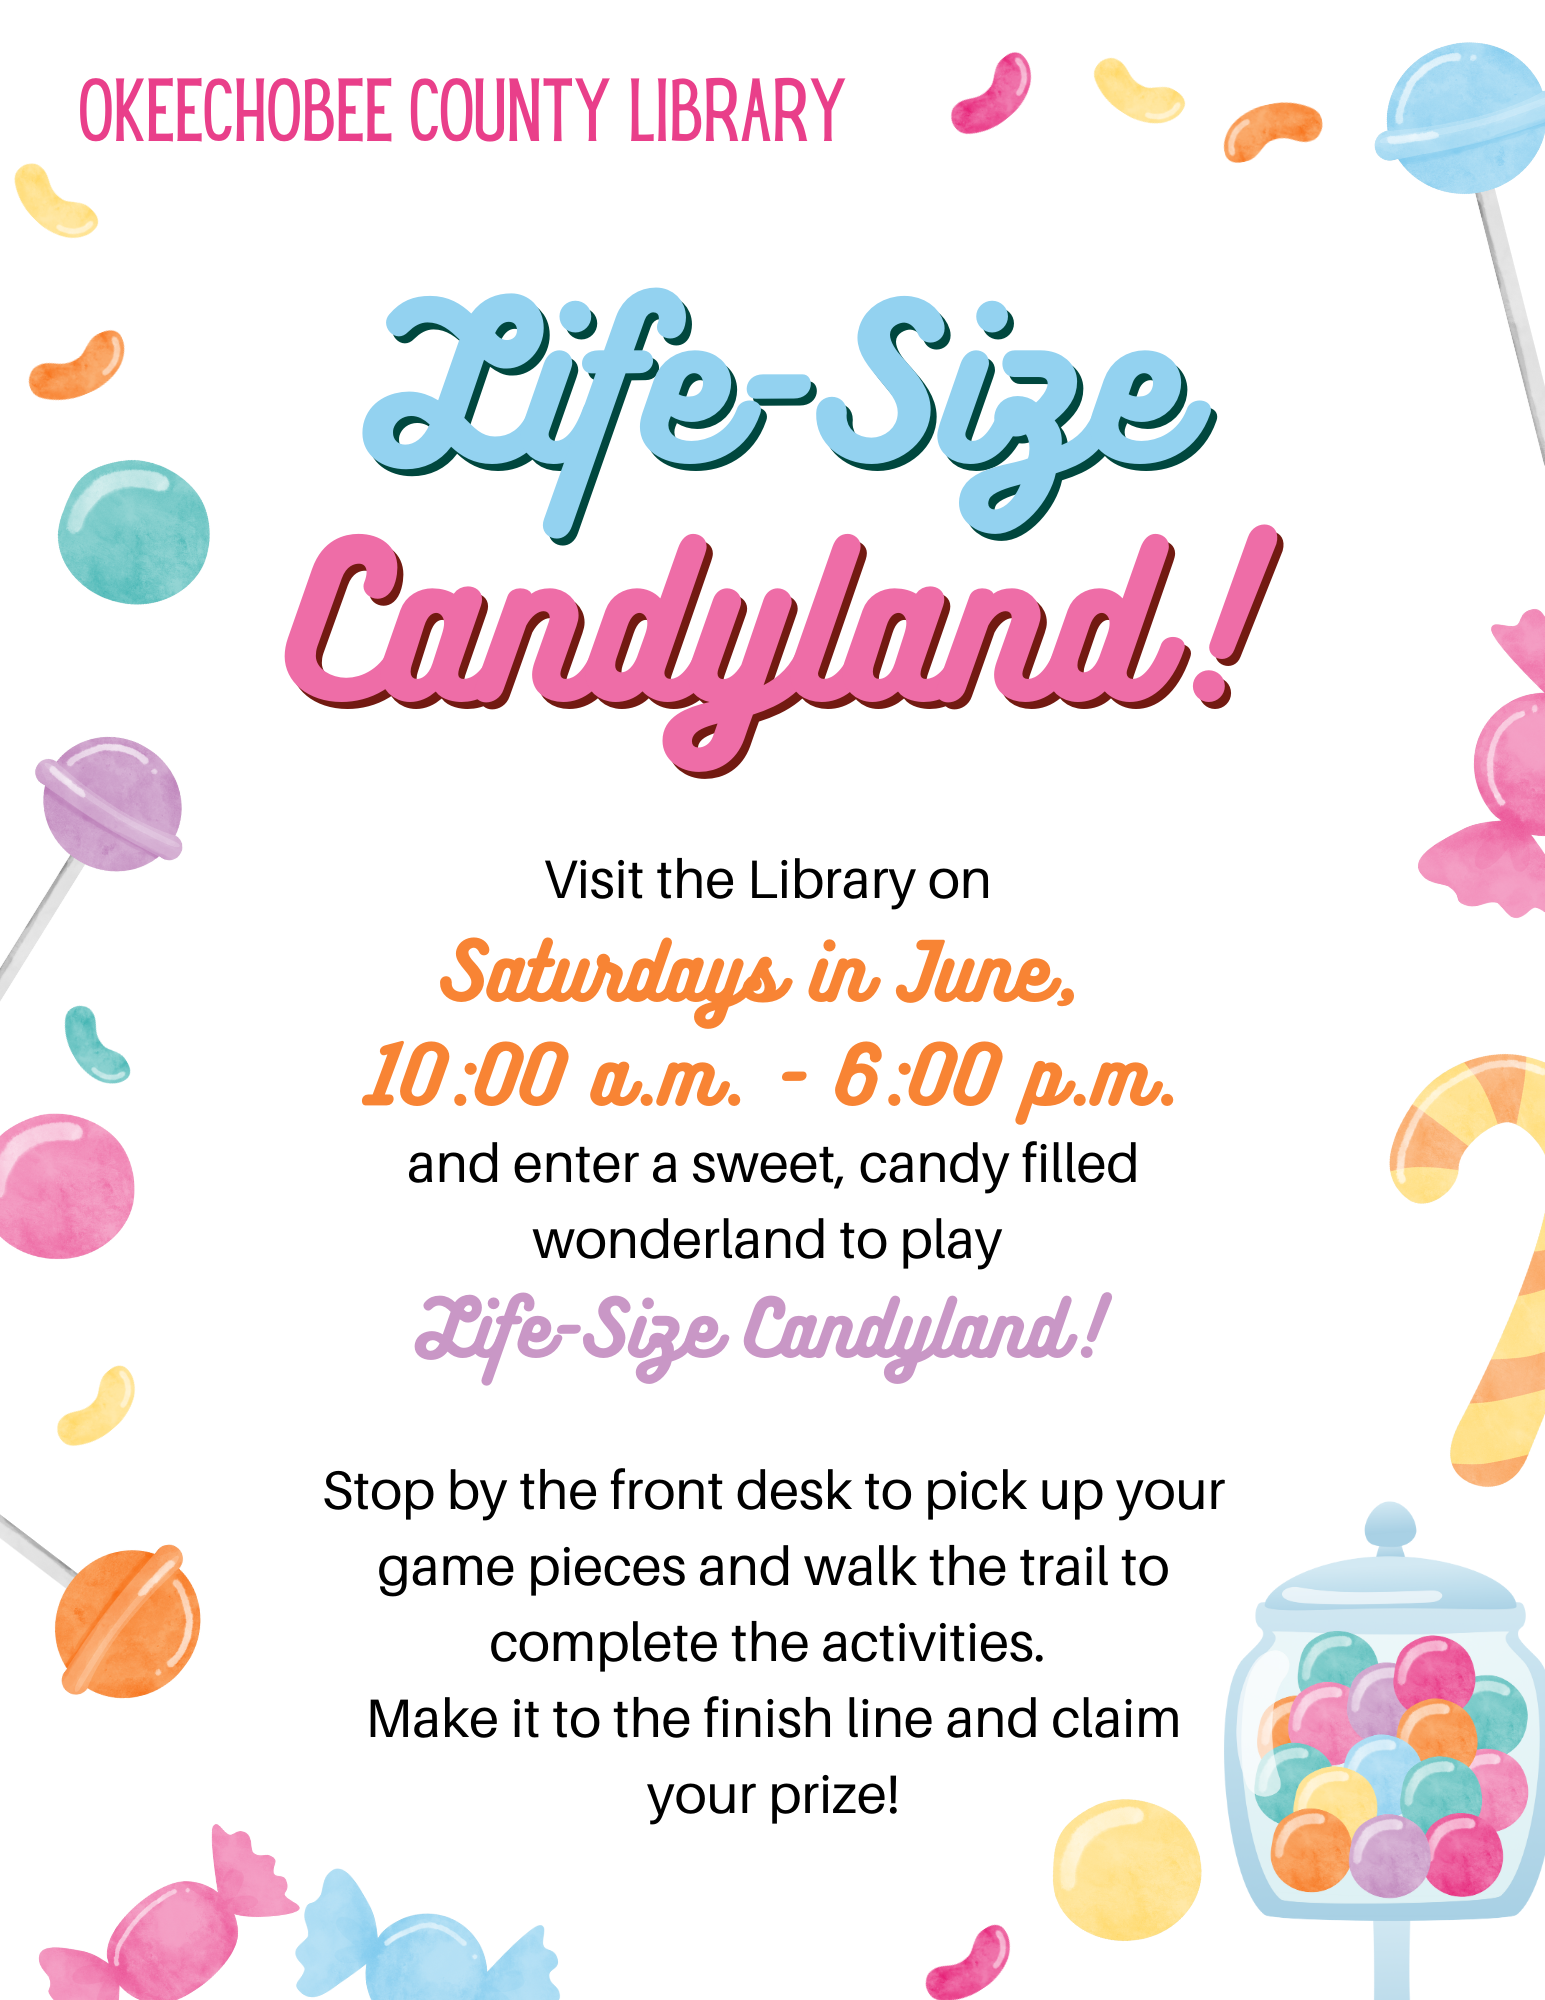 Visit the Library on Saturdays in June, 10:00 - 6:00 and enter a sweet, candy filled wonderland to play Life-size Candyland!